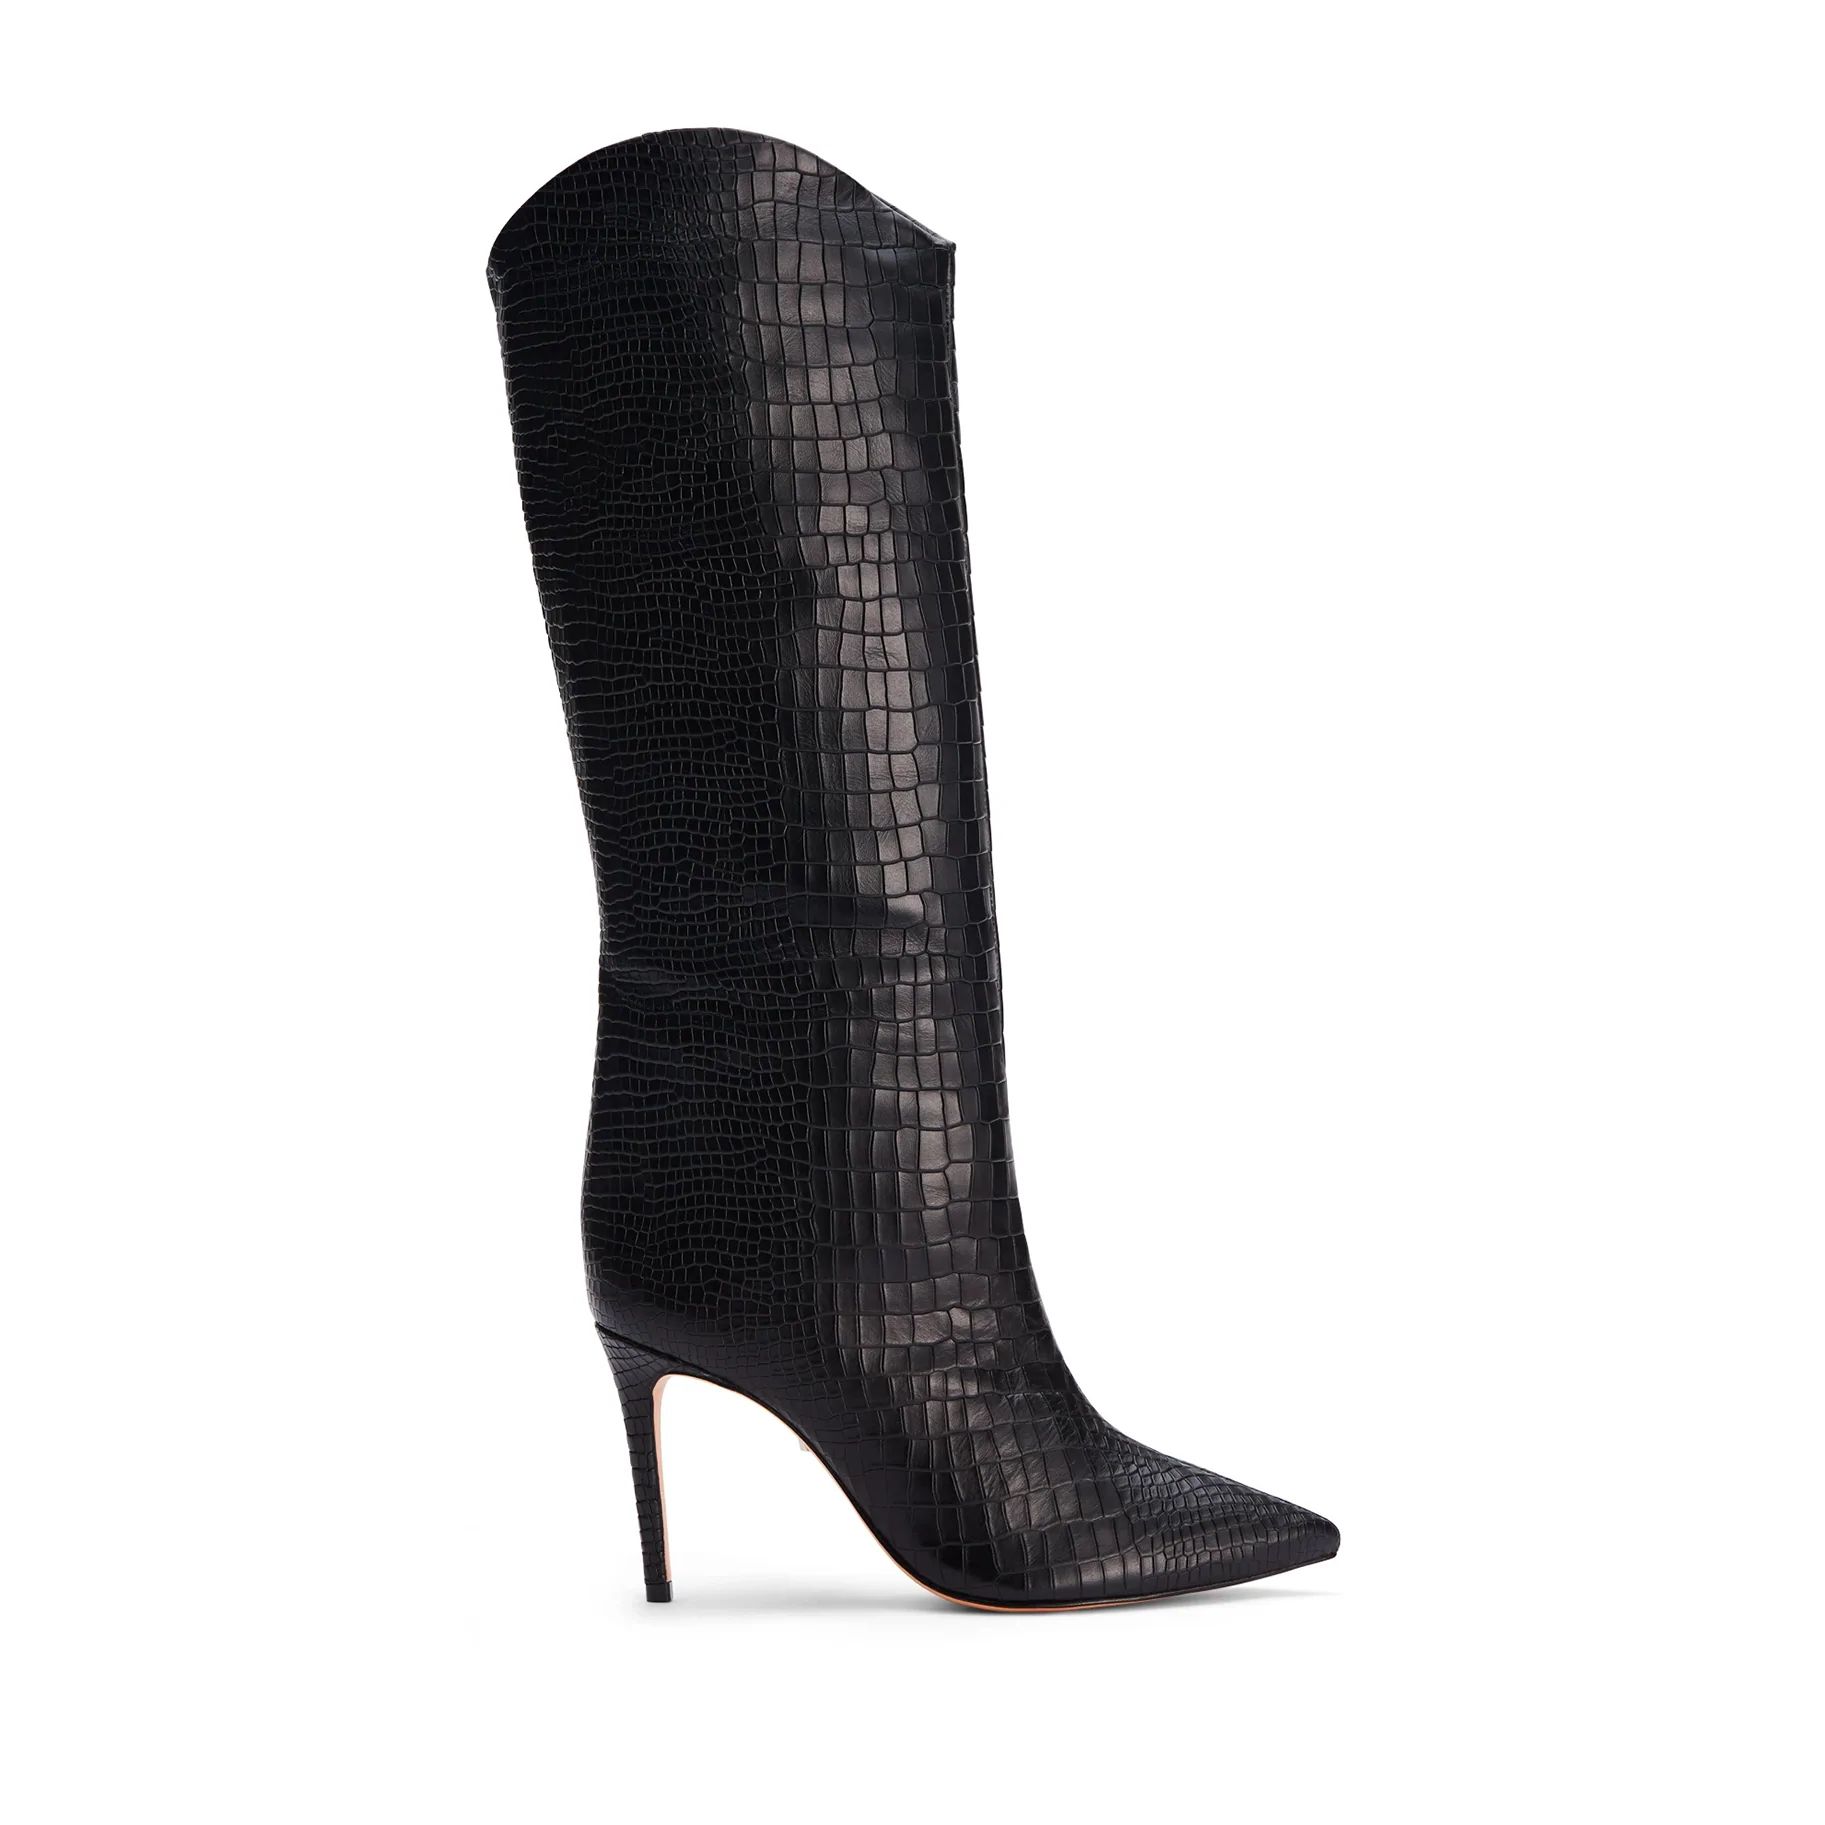 Maryana Boot in high-shine patent leather! | Schutz Shoes | Schutz Shoes (US)